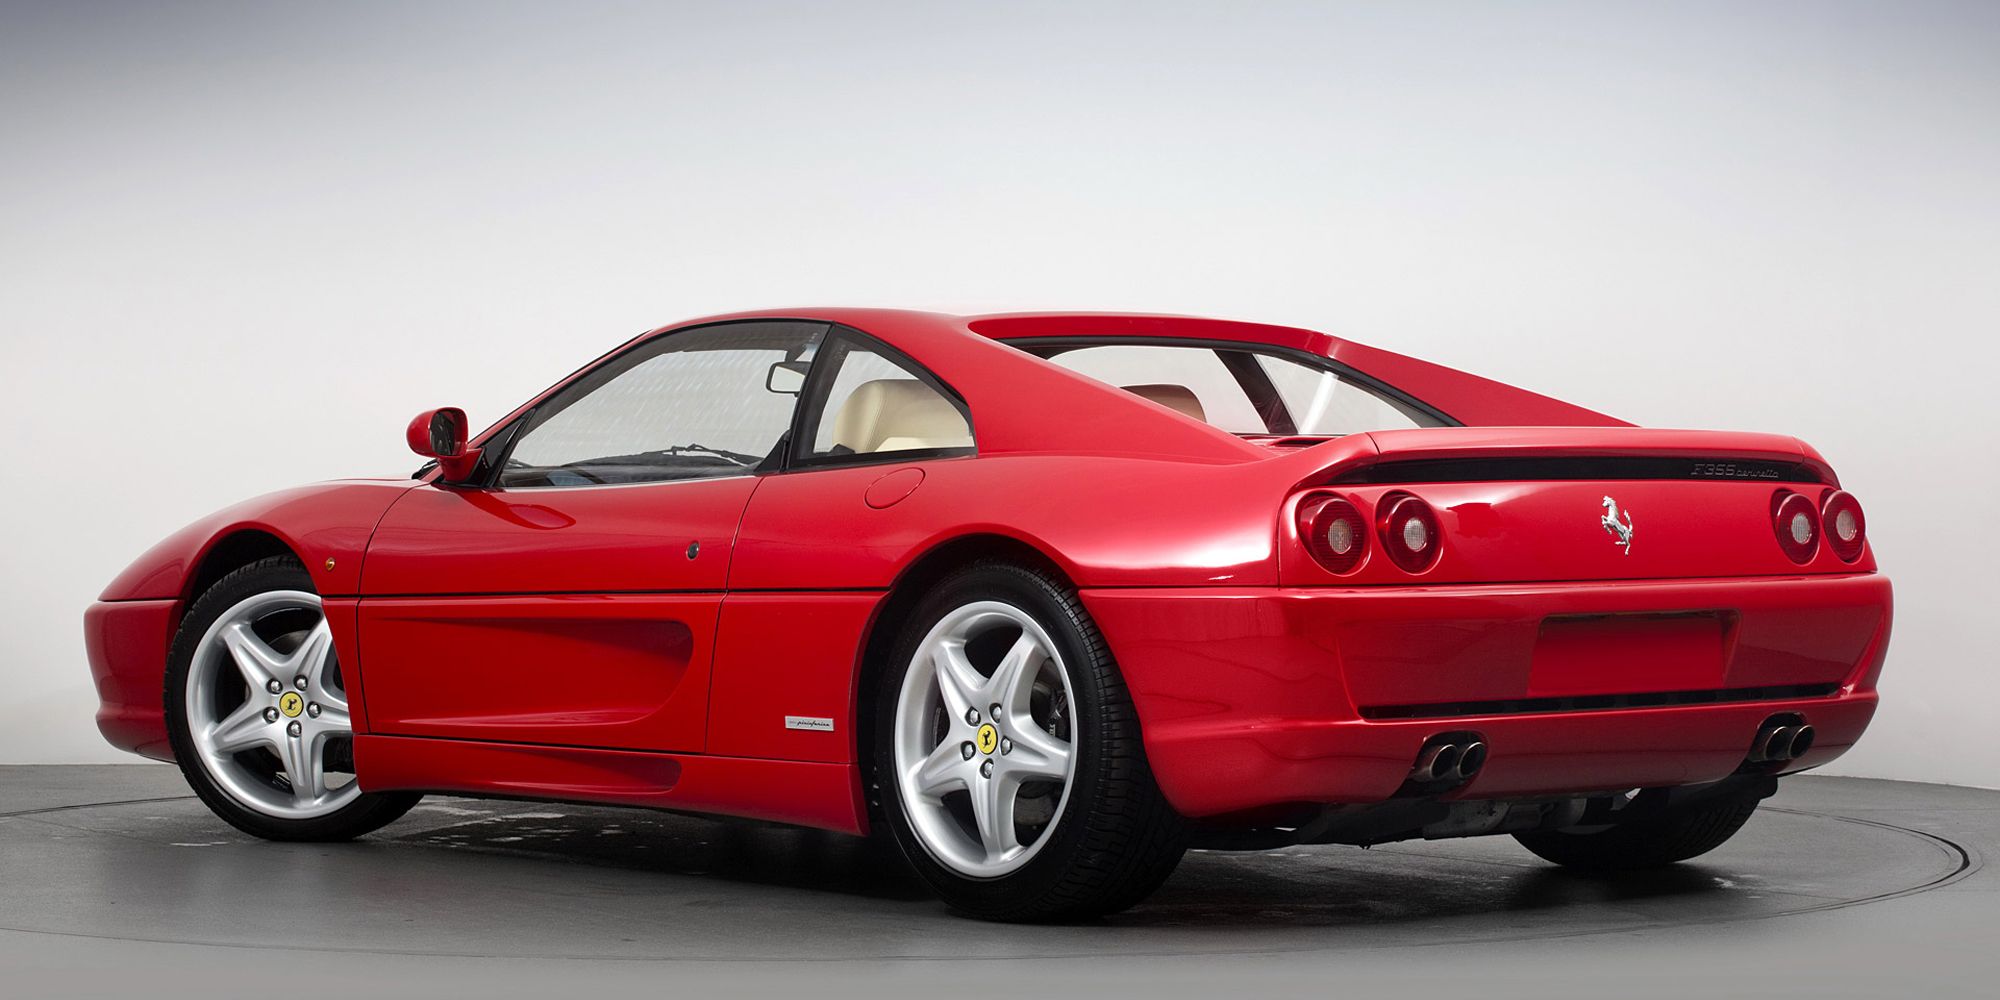 Rear 3/4 view of the F355